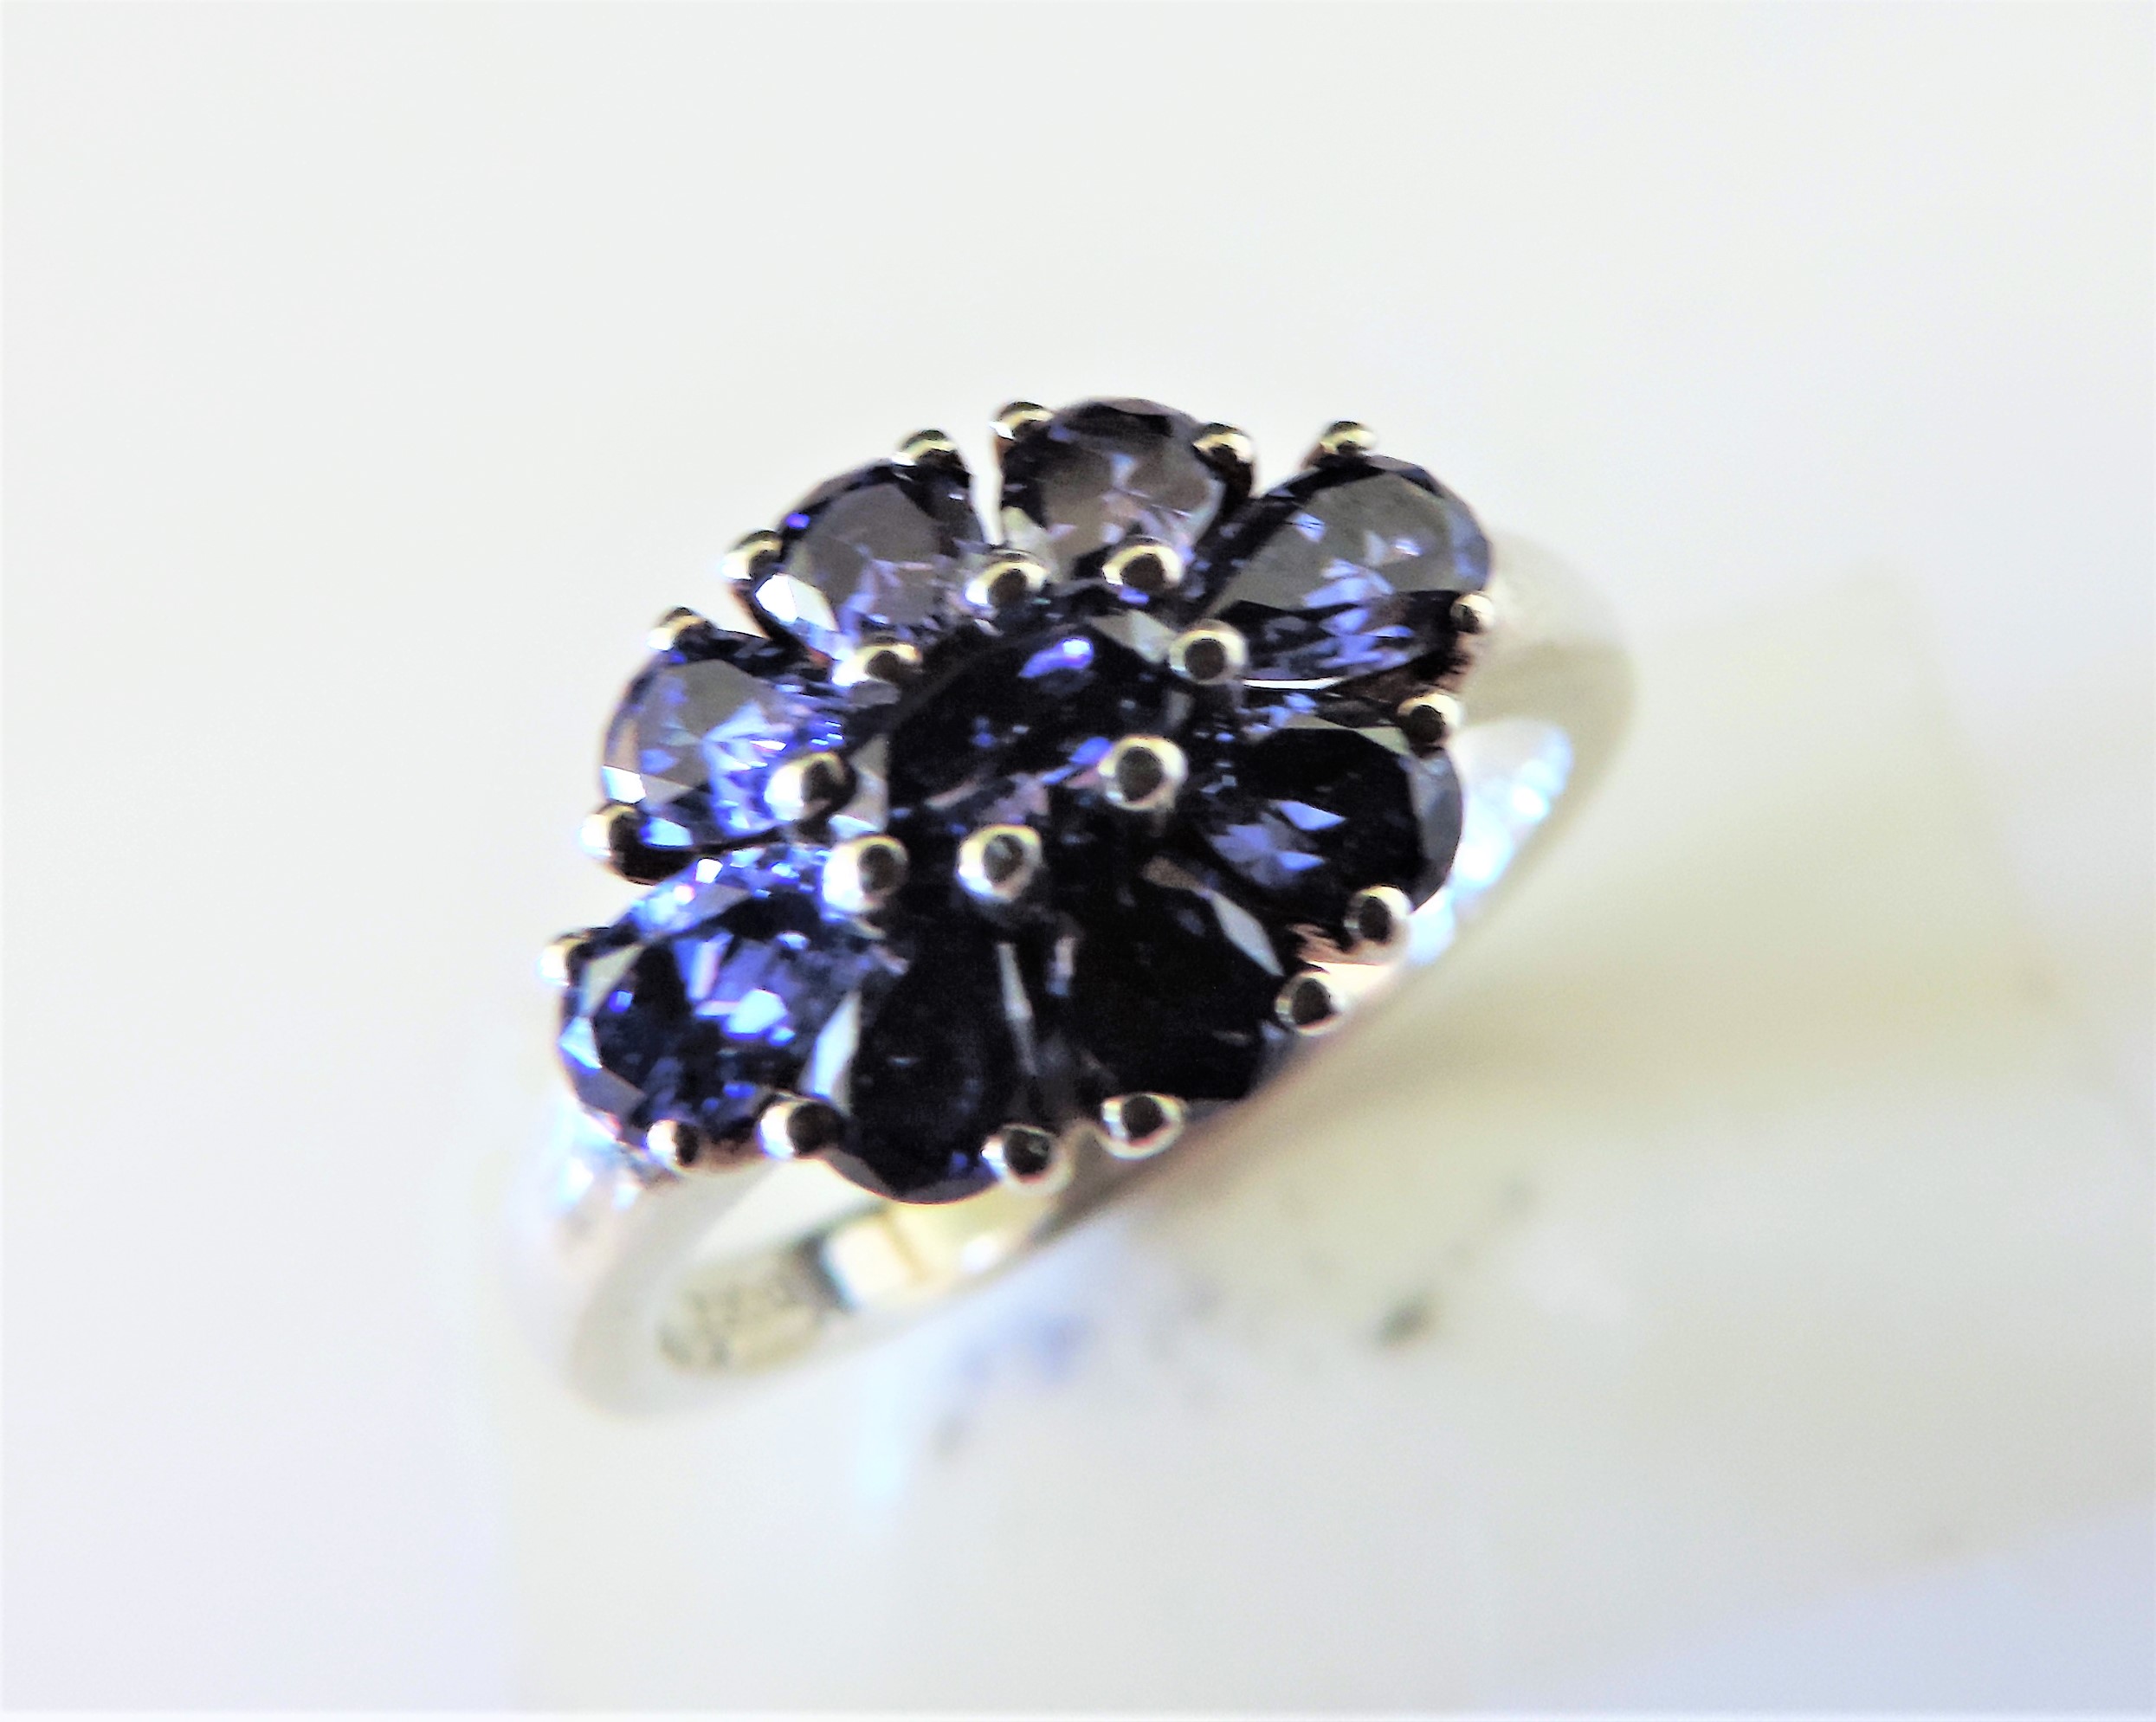 1.8 ct Tanzanite Cluster Ring in Sterling Silver - Image 4 of 4